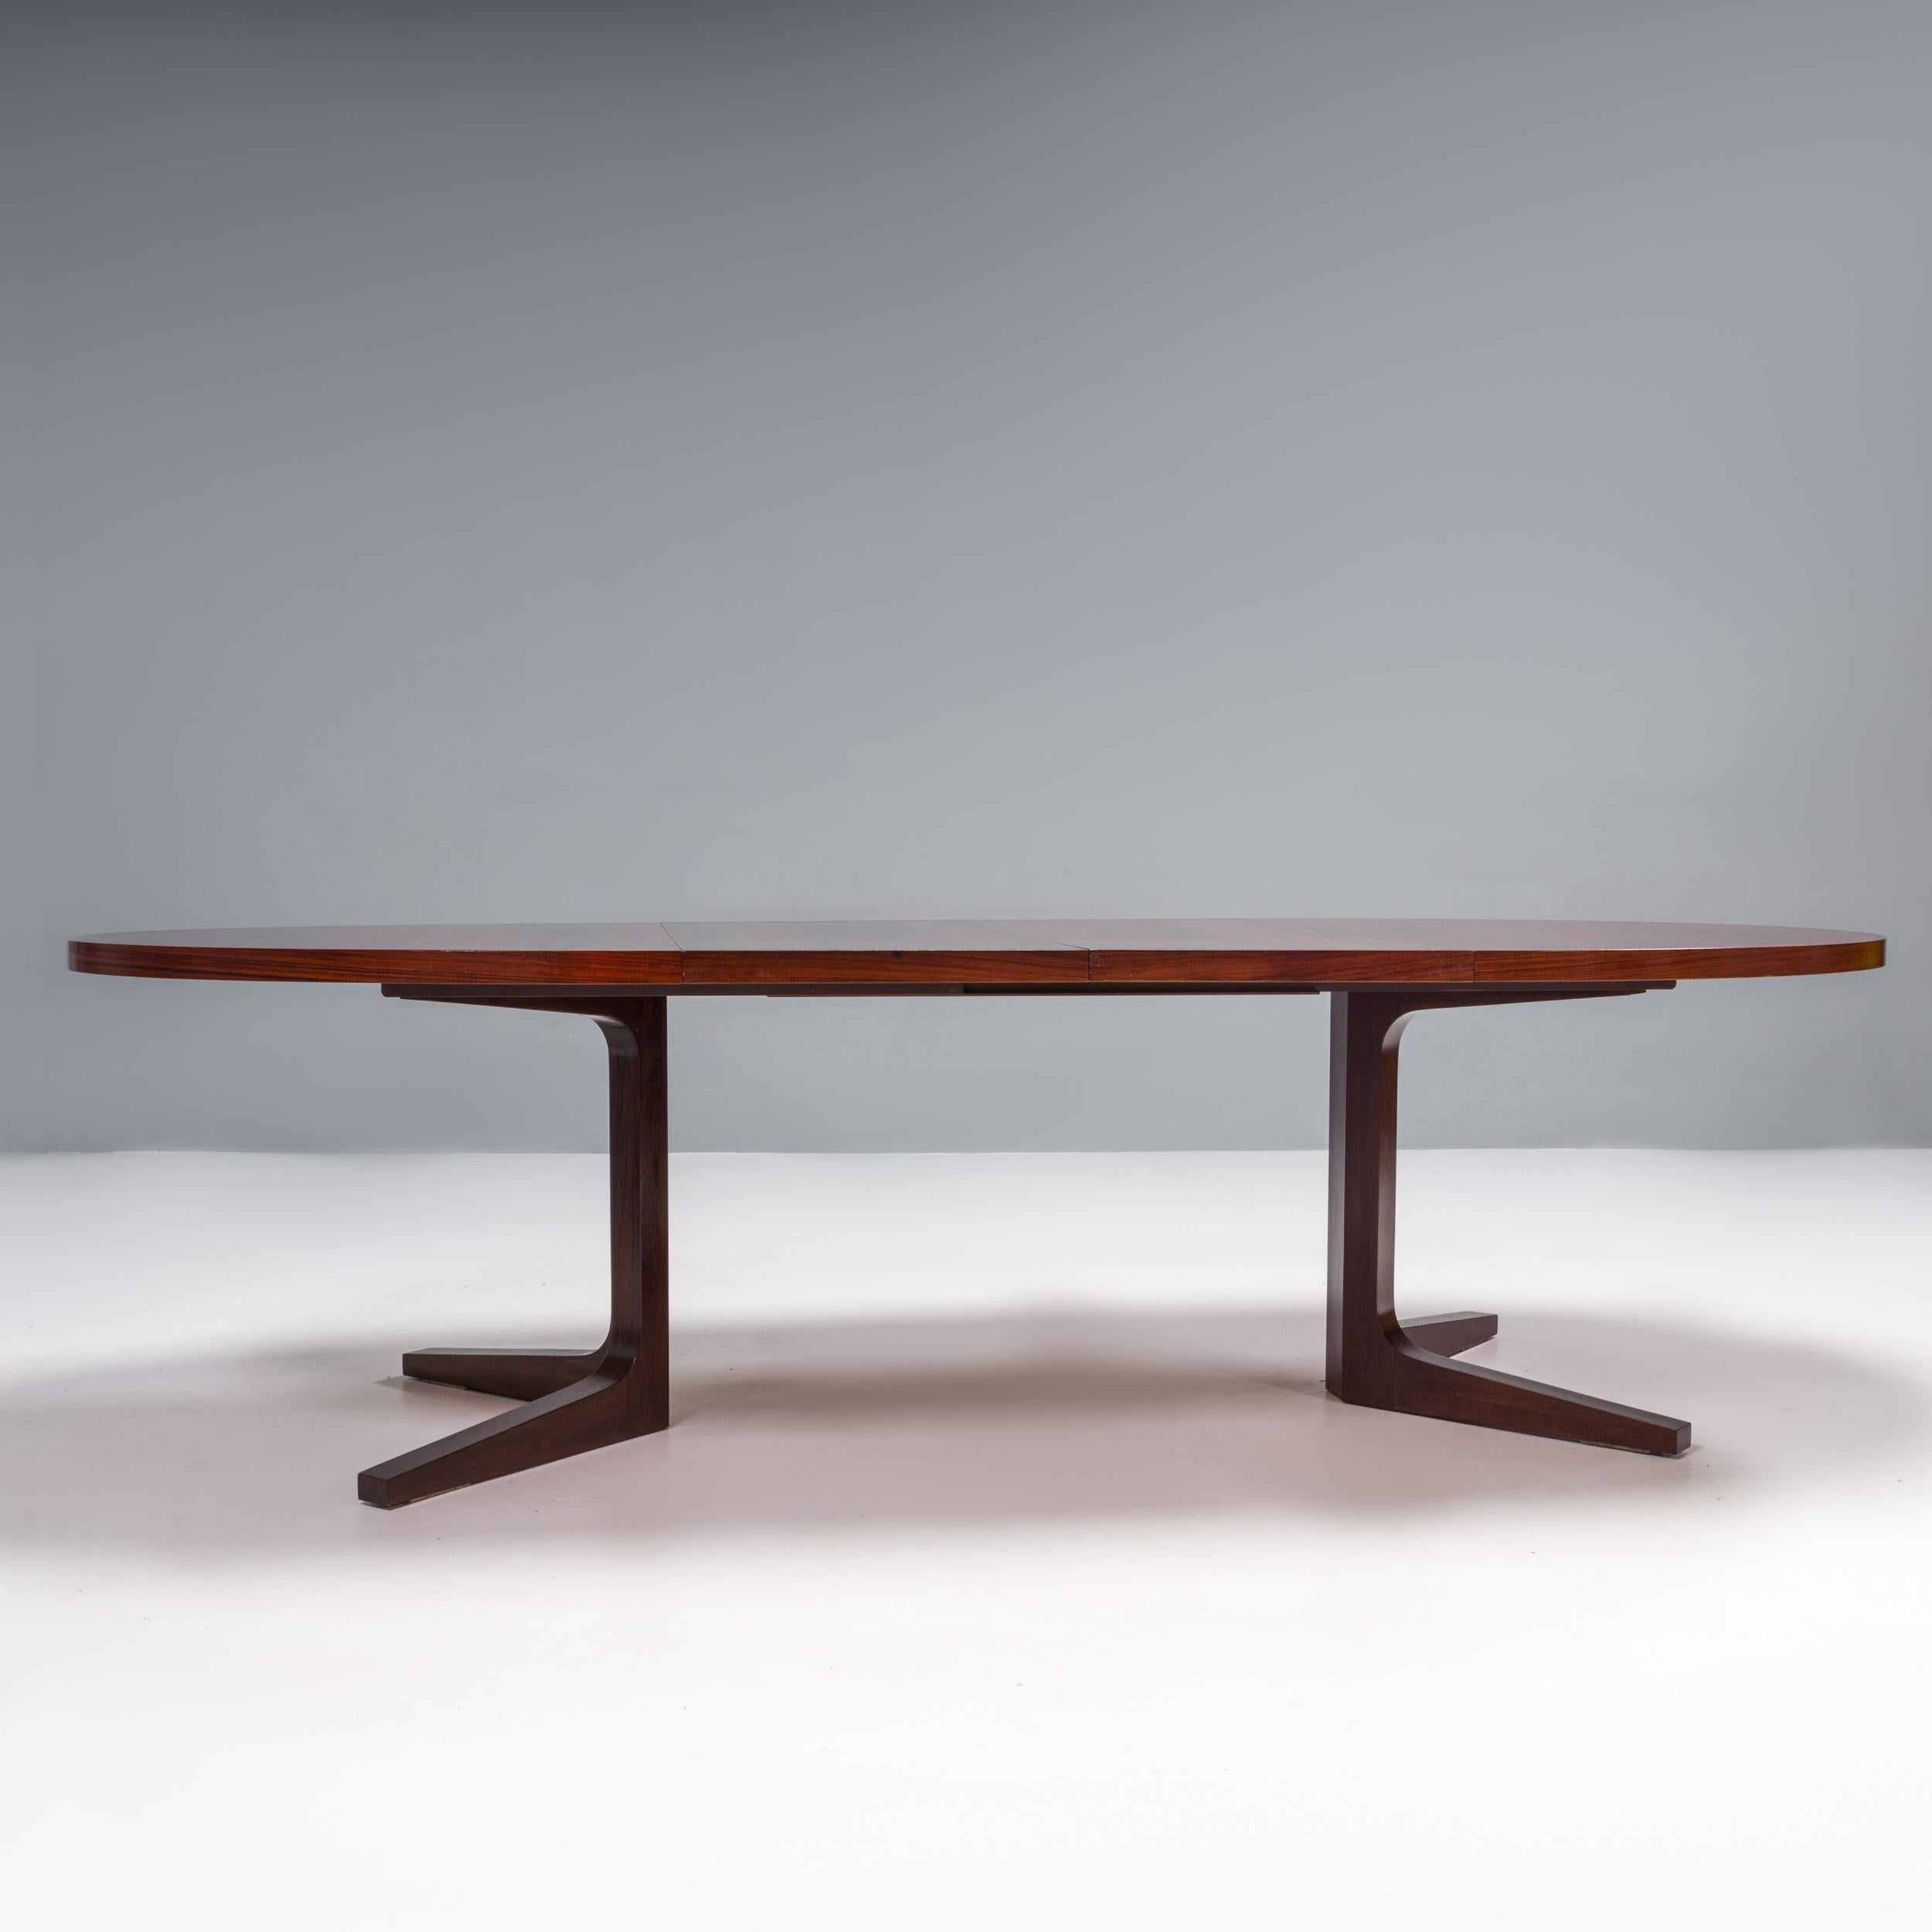 Designed and made by Dyrland in Denmark, this dining table is a classic example of mid-century modern design.

Constructed from rosewood, the dining table has a circular table top sitting on two sets of v-shaped legs, which create a four star base